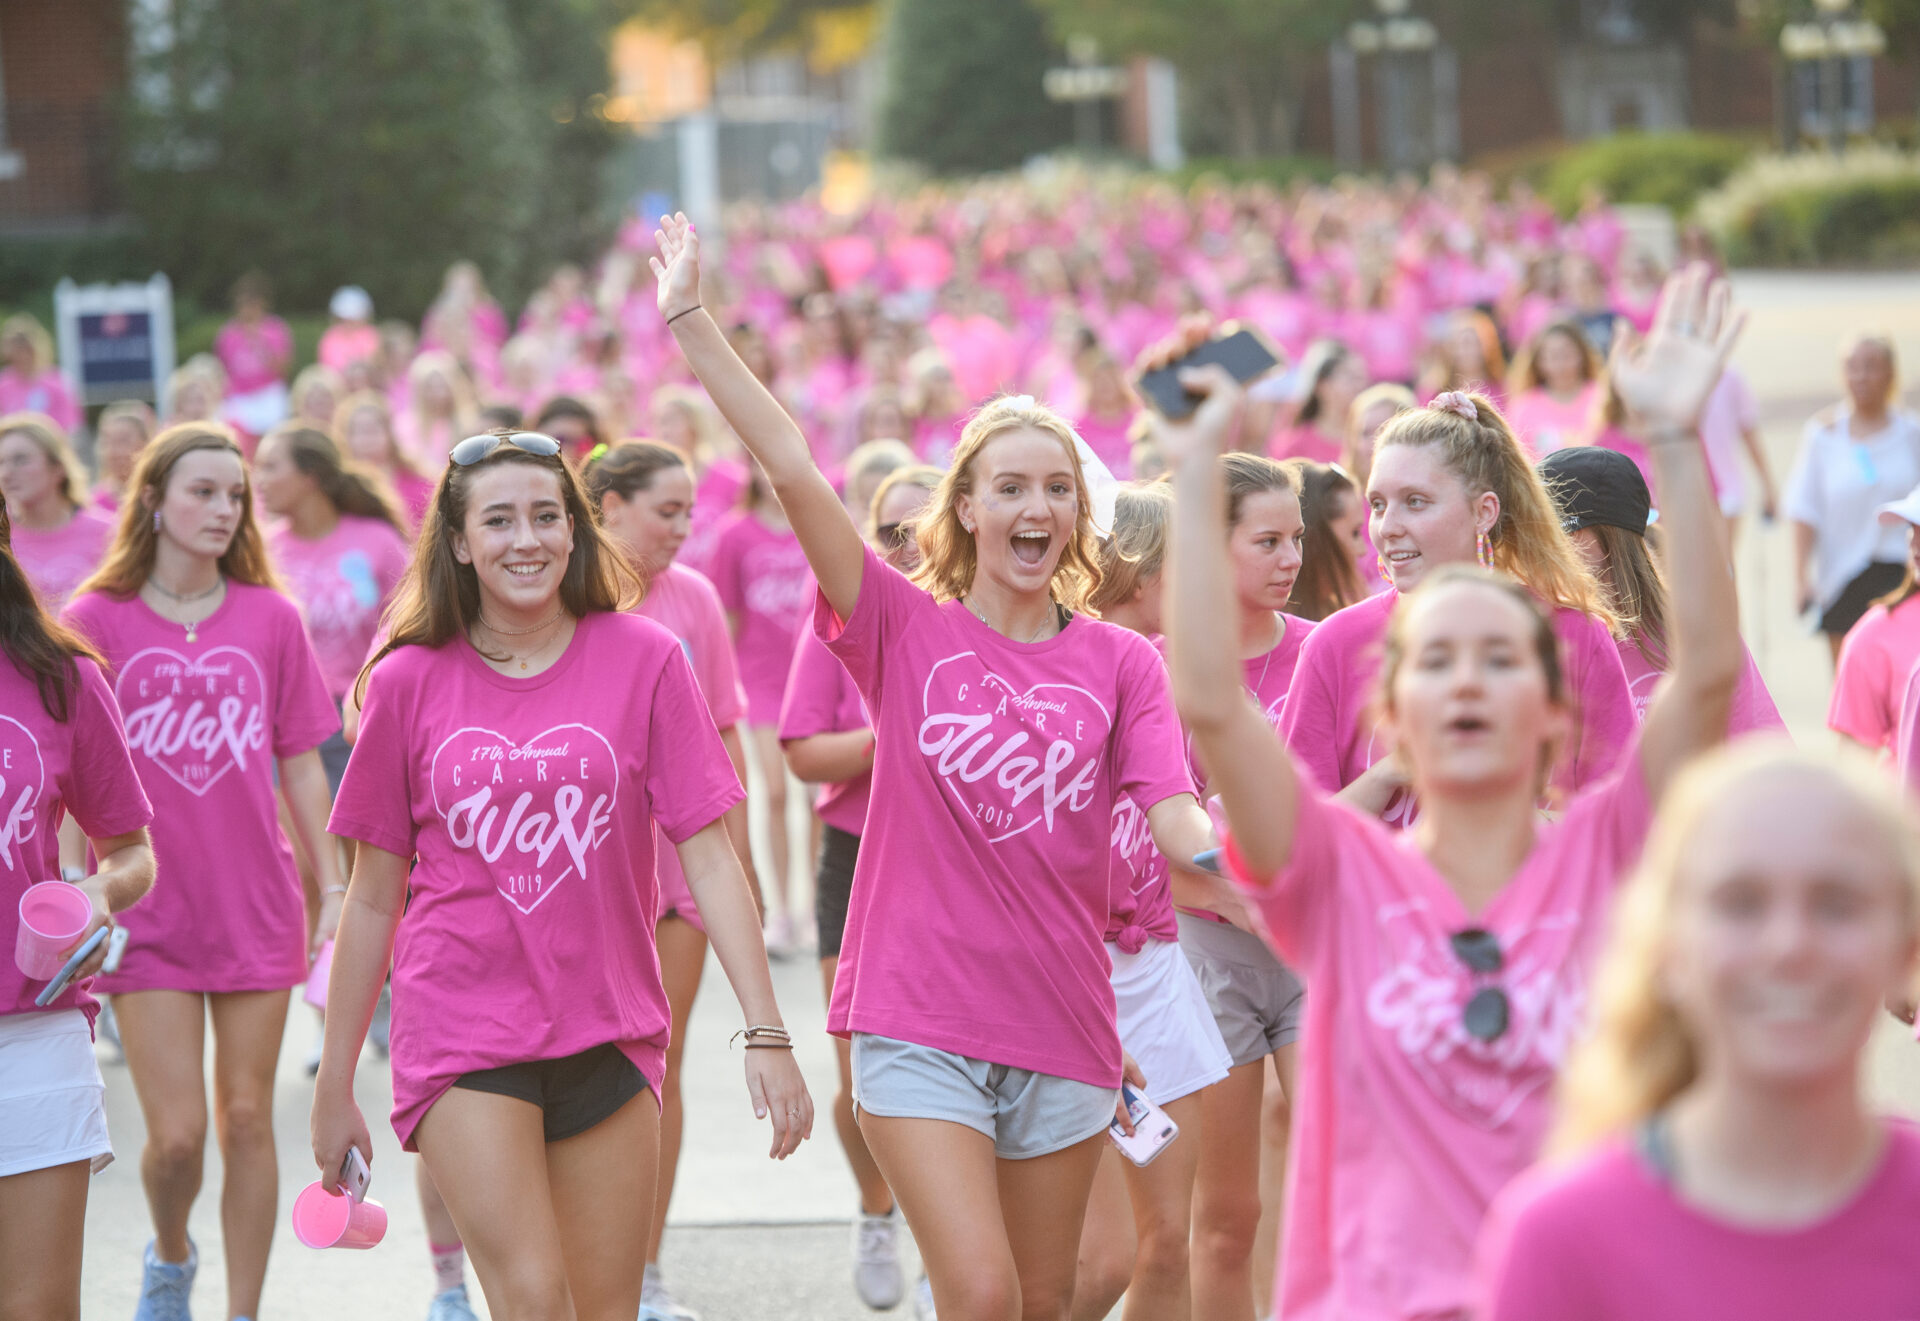 CARE Walk Continues to Contribute to University Community